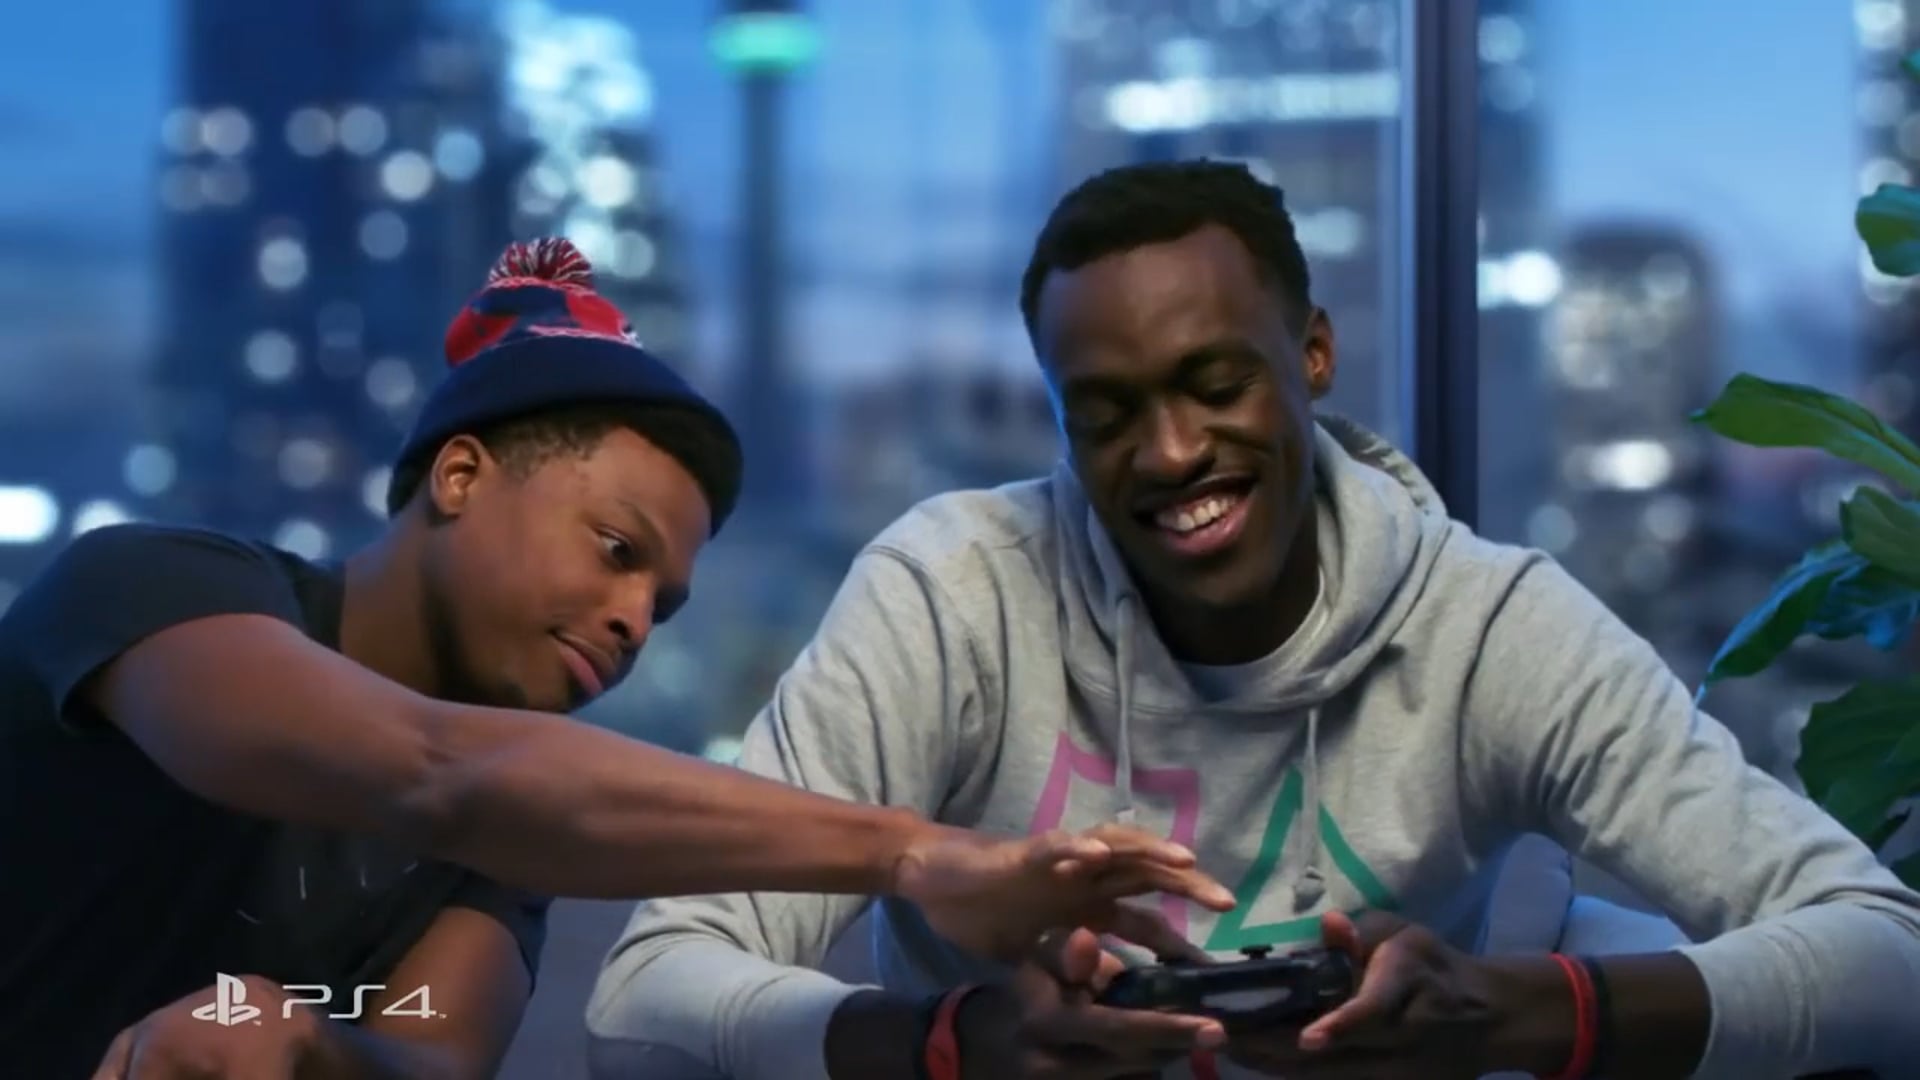 That One Gamer Friend – ft Raptors Kyle Lowry and Pascal Siakam